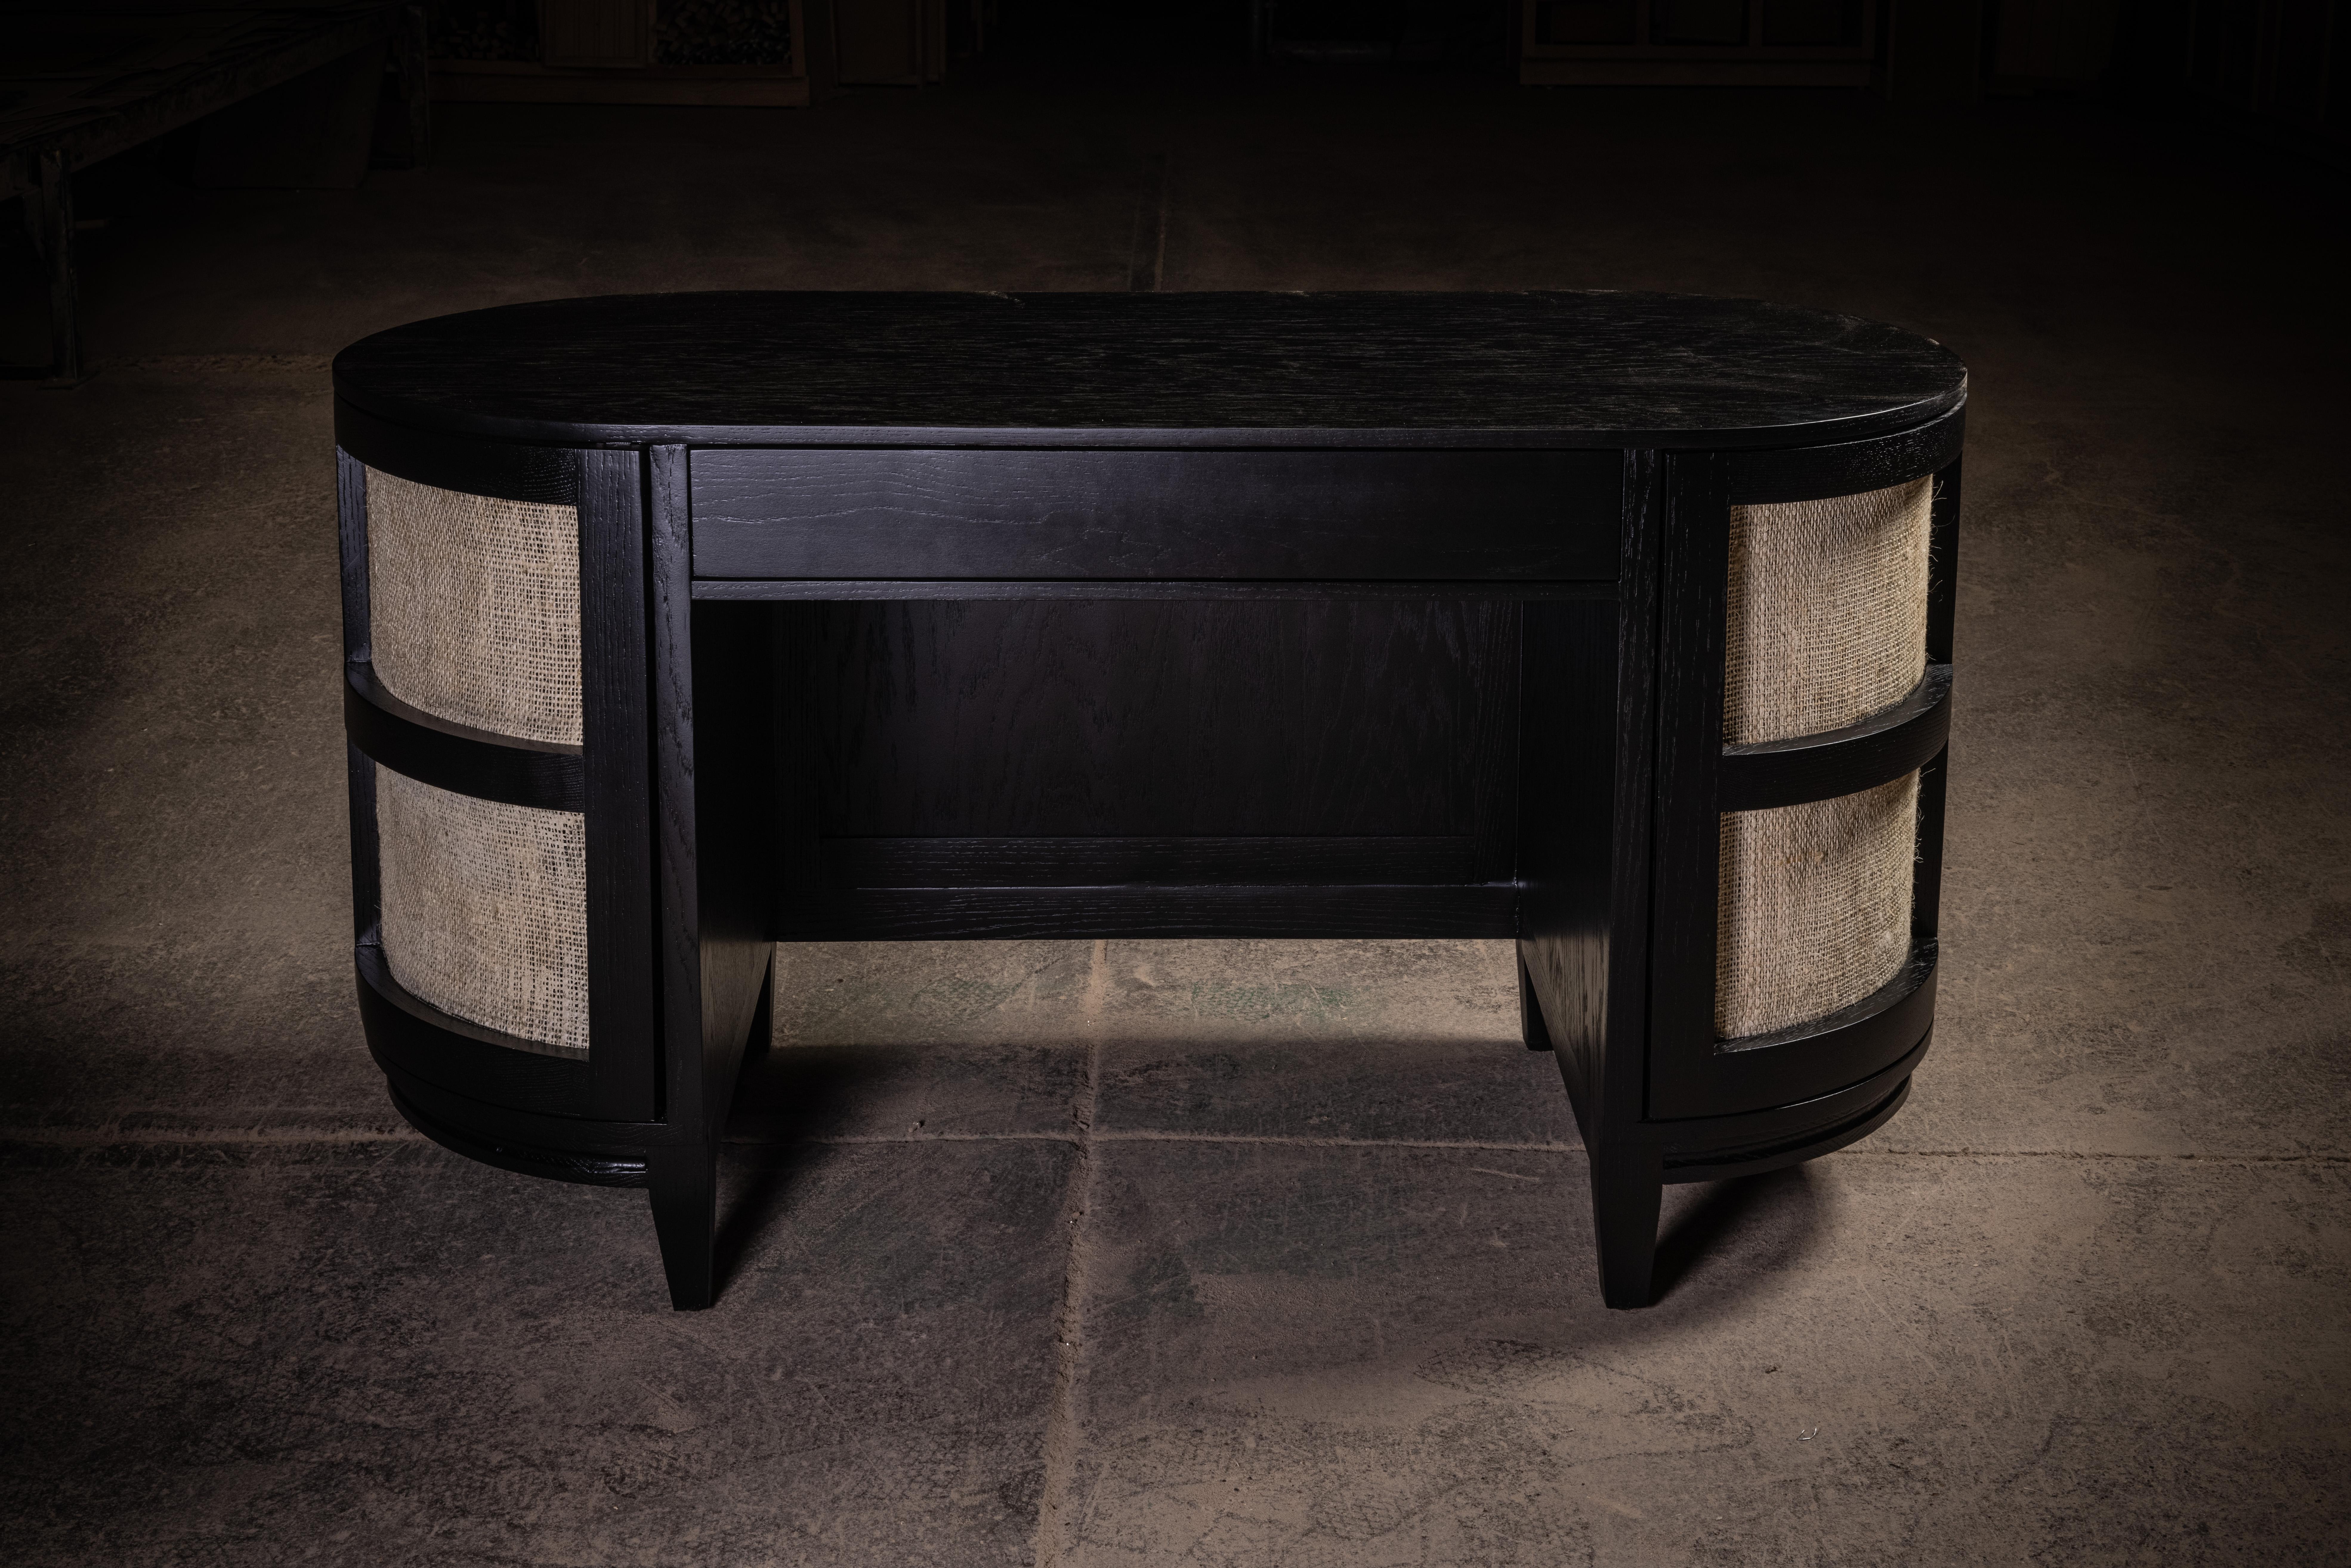 Modern, oval black solid oak desk with 2 doors covered with Ixtle and a center drawer.